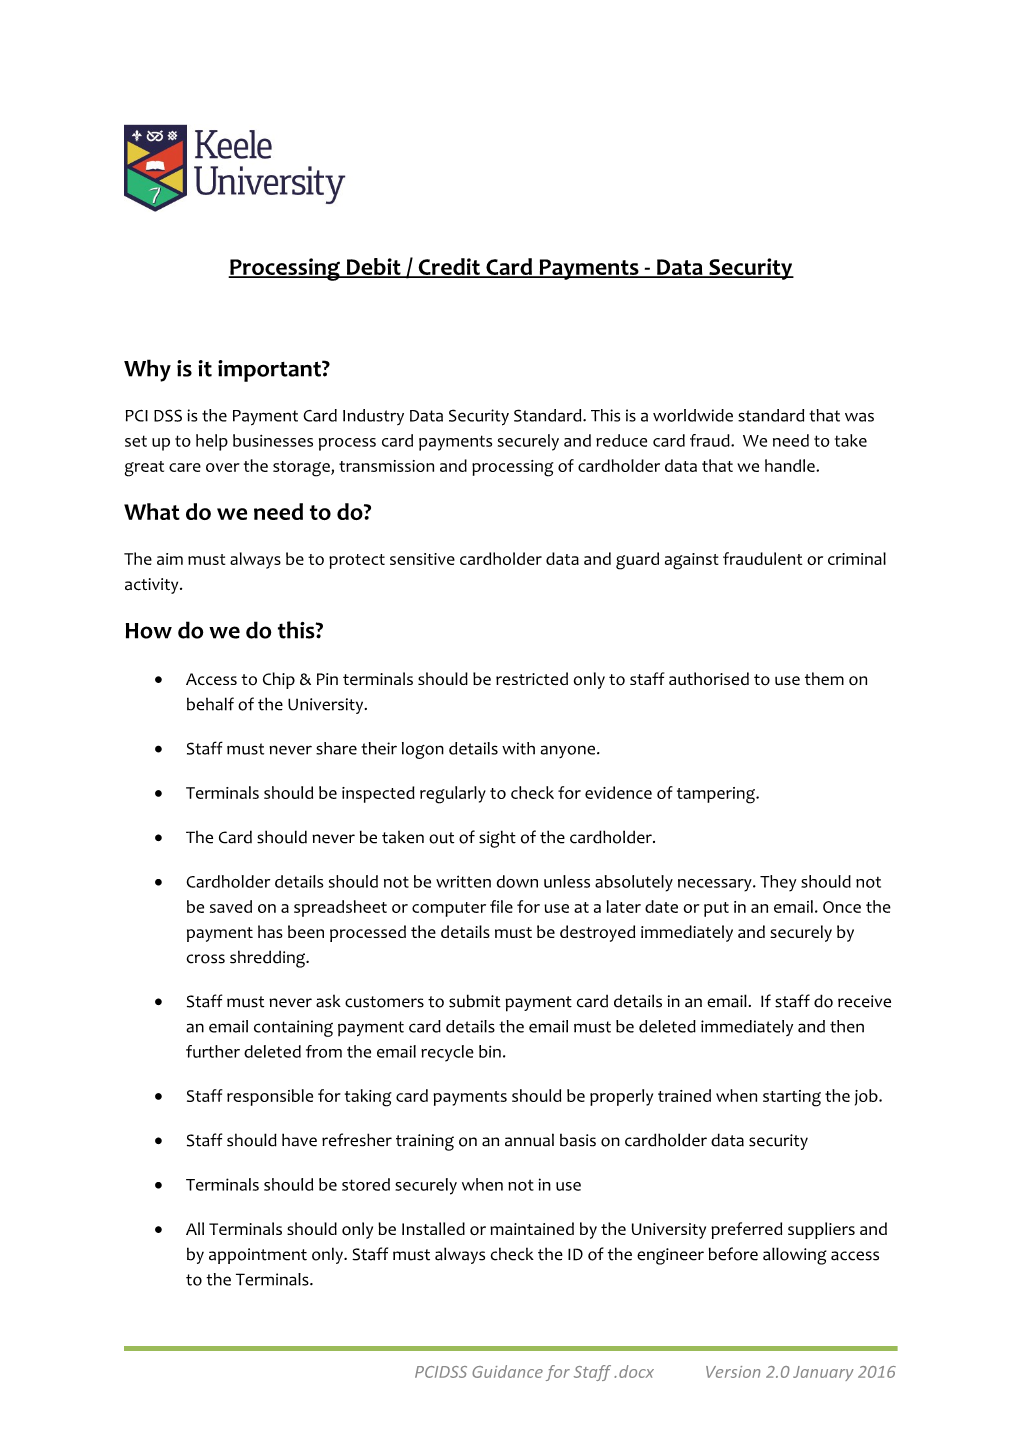 Processing Debit / Credit Card Payments - Data Security